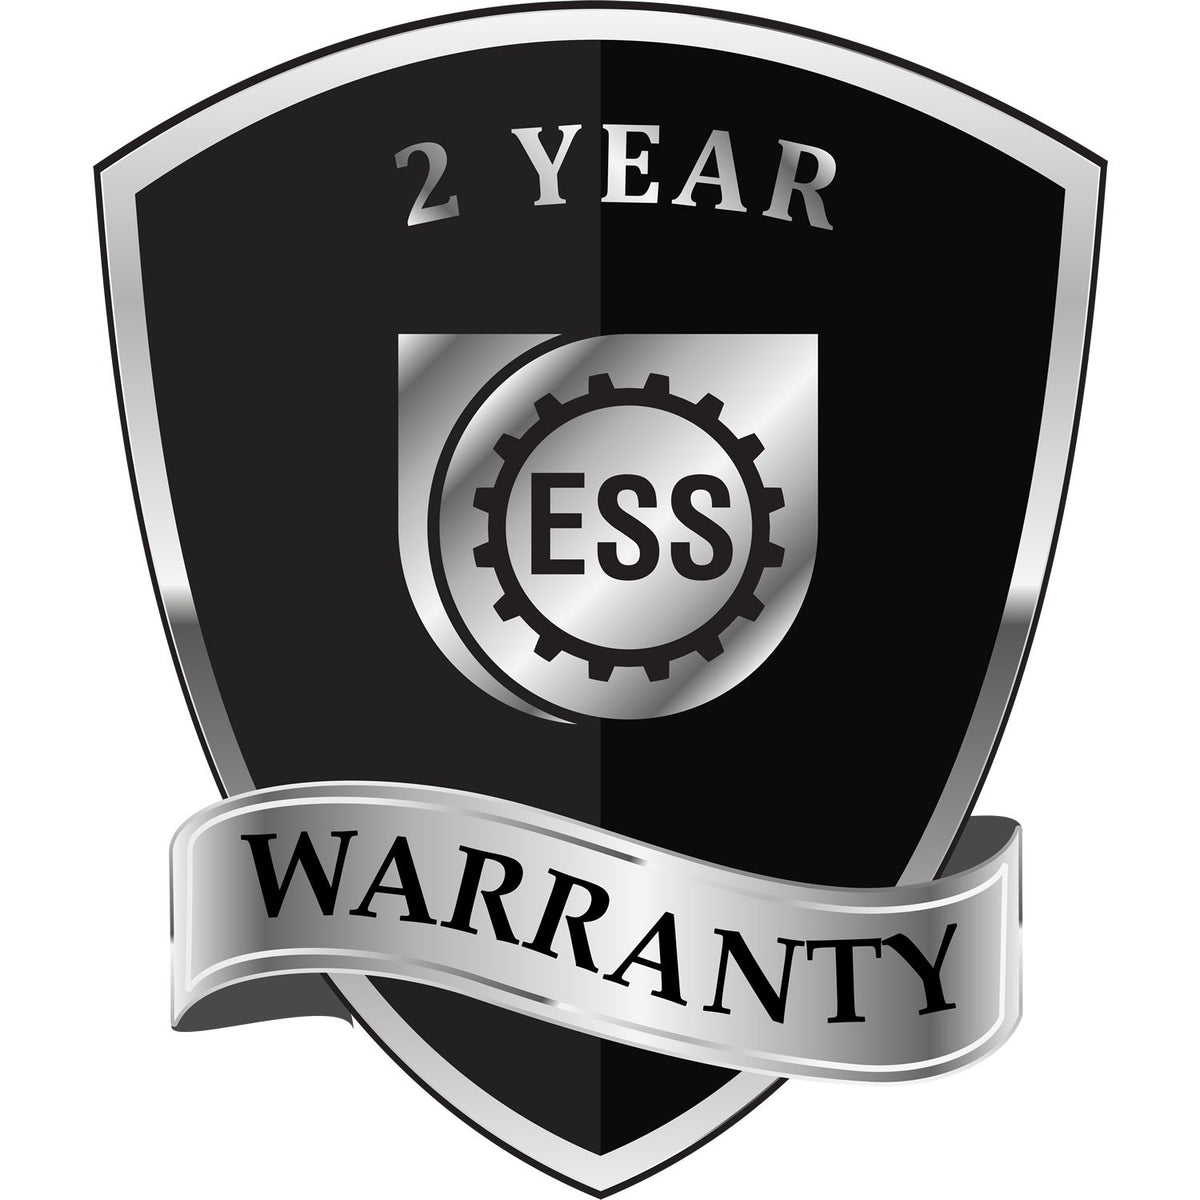 A black and silver badge or emblem showing warranty information for the Gift Wyoming Geologist Seal